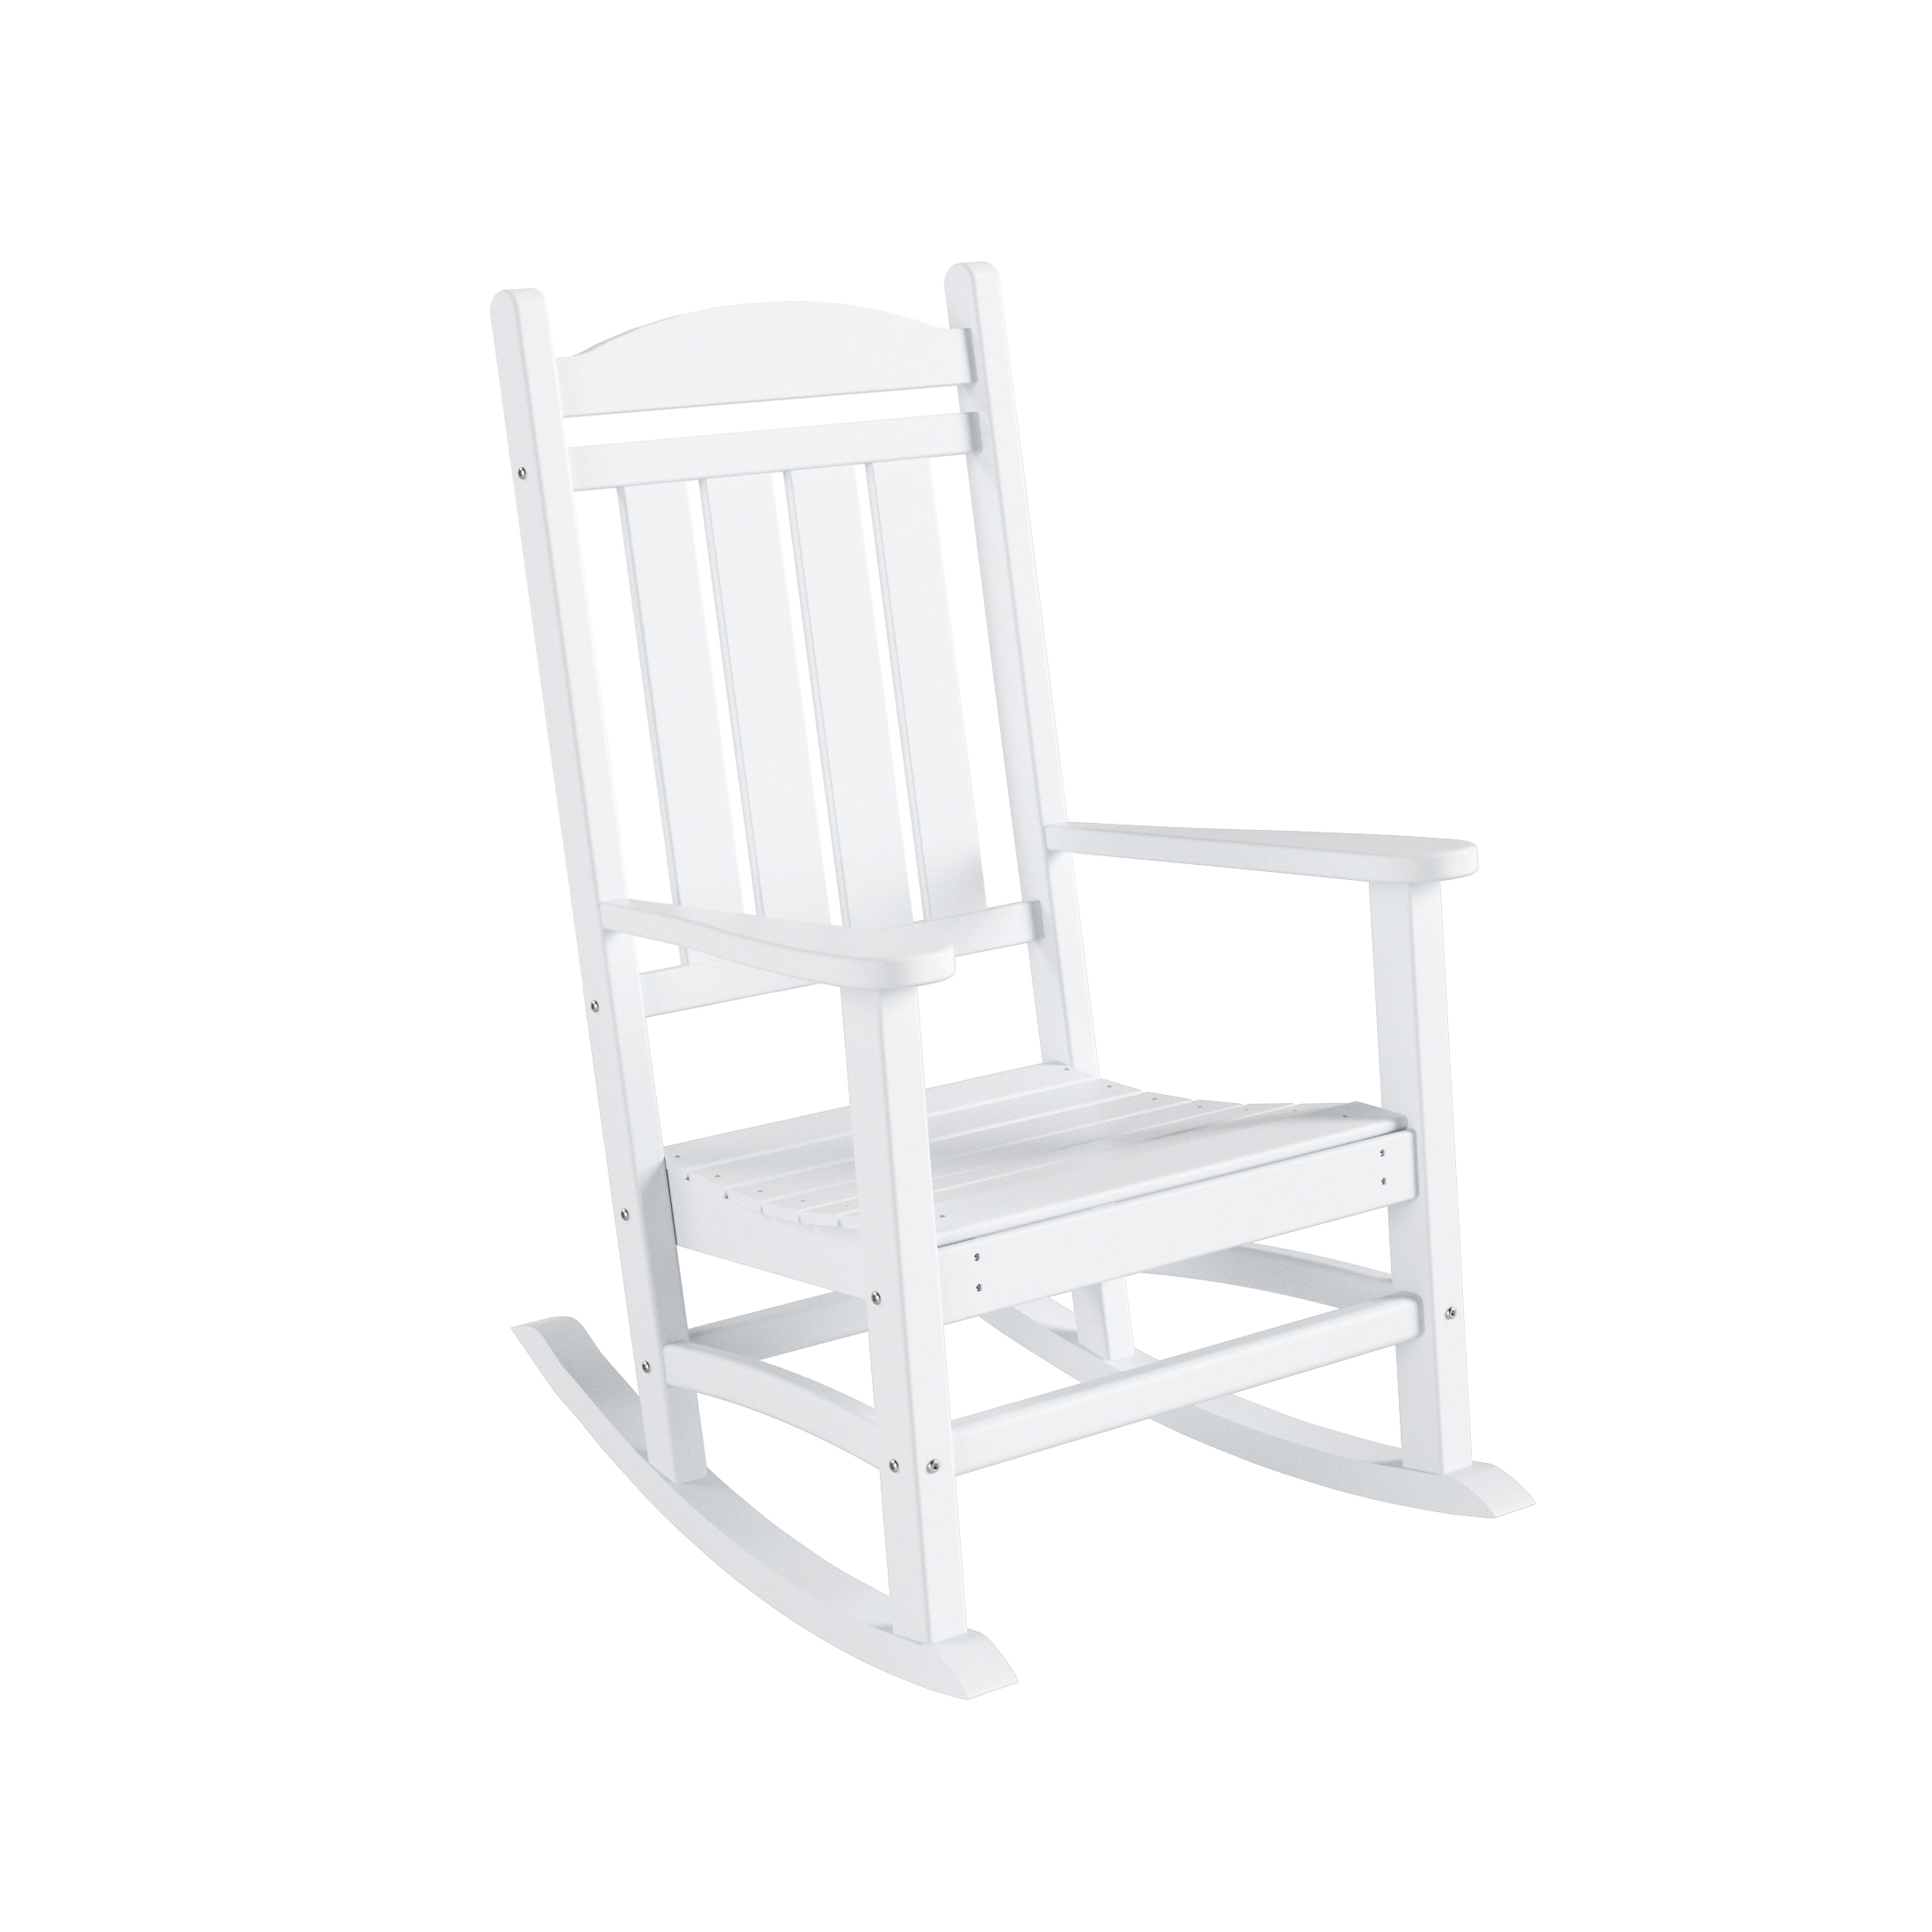 GARDEN 2-Piece Set Classic Plastic Porch Rocking Chair with Round Side Table Included, White - image 4 of 8